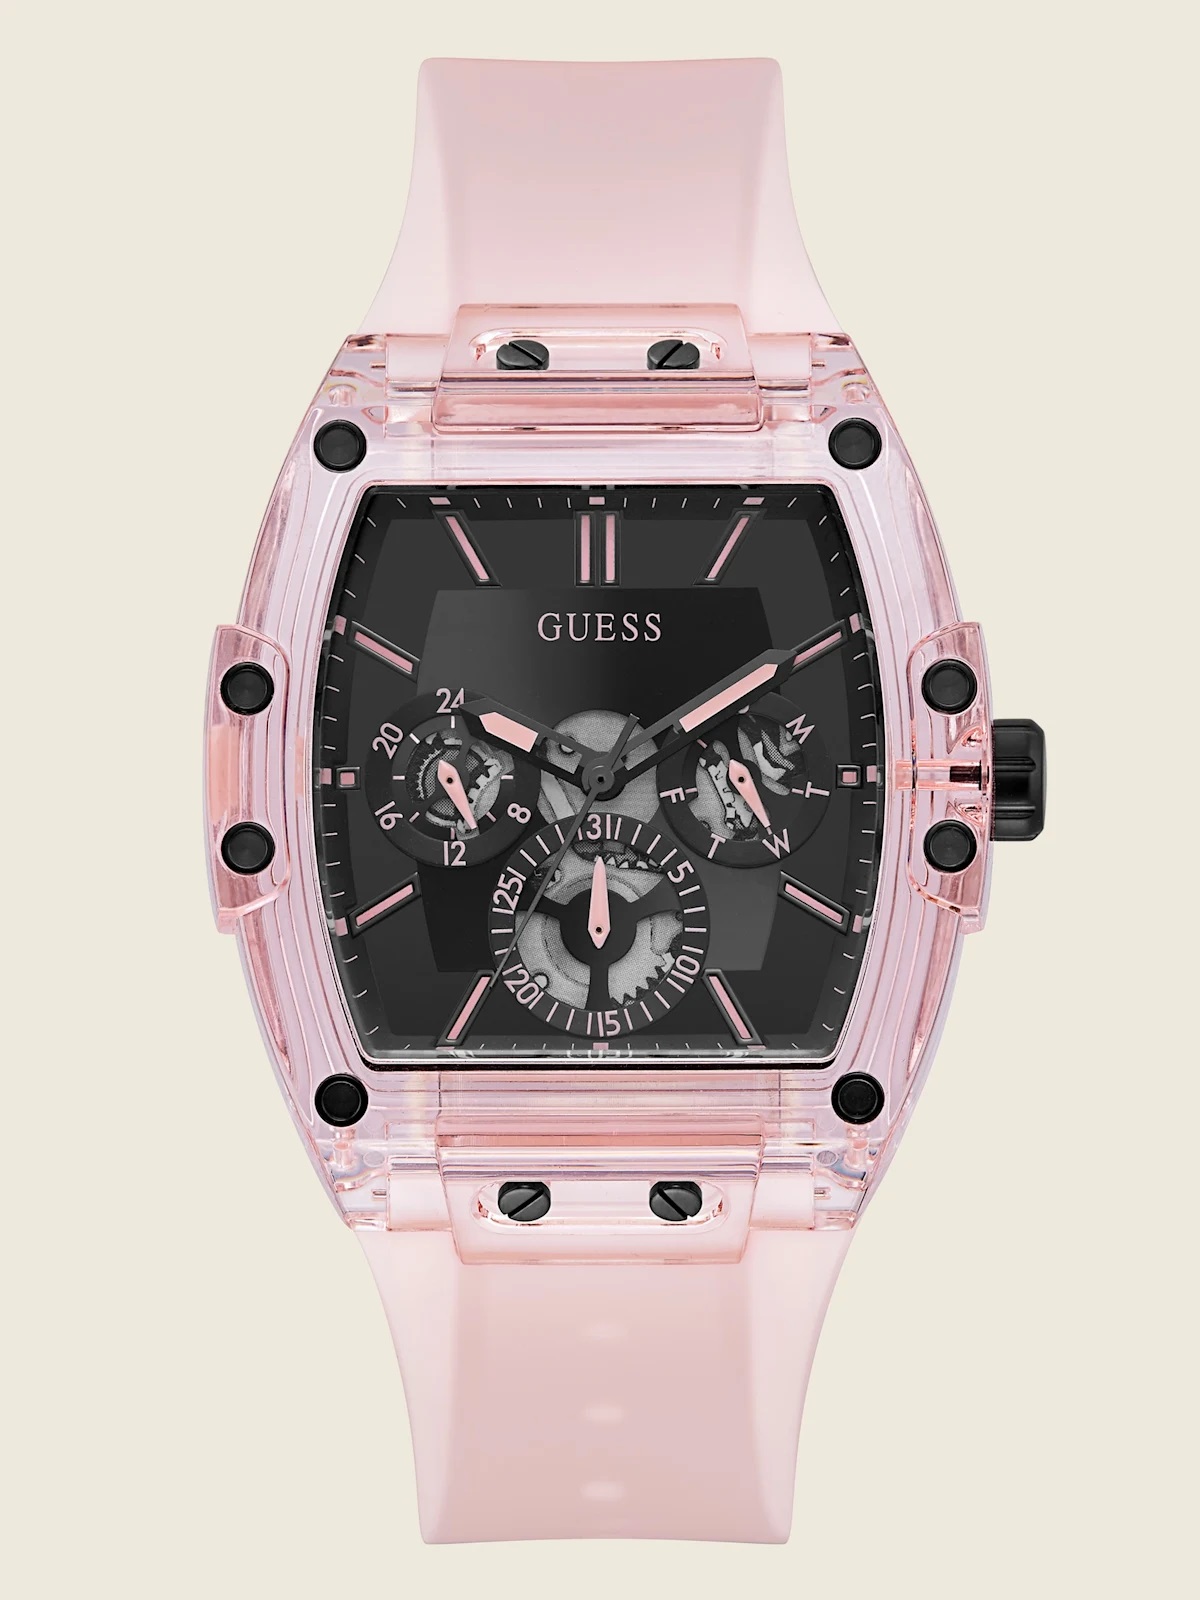 ĐỒNG HỒ ĐEO TAY GUESS PINK MULTIFUNCTION WATCH GW0203G11 11